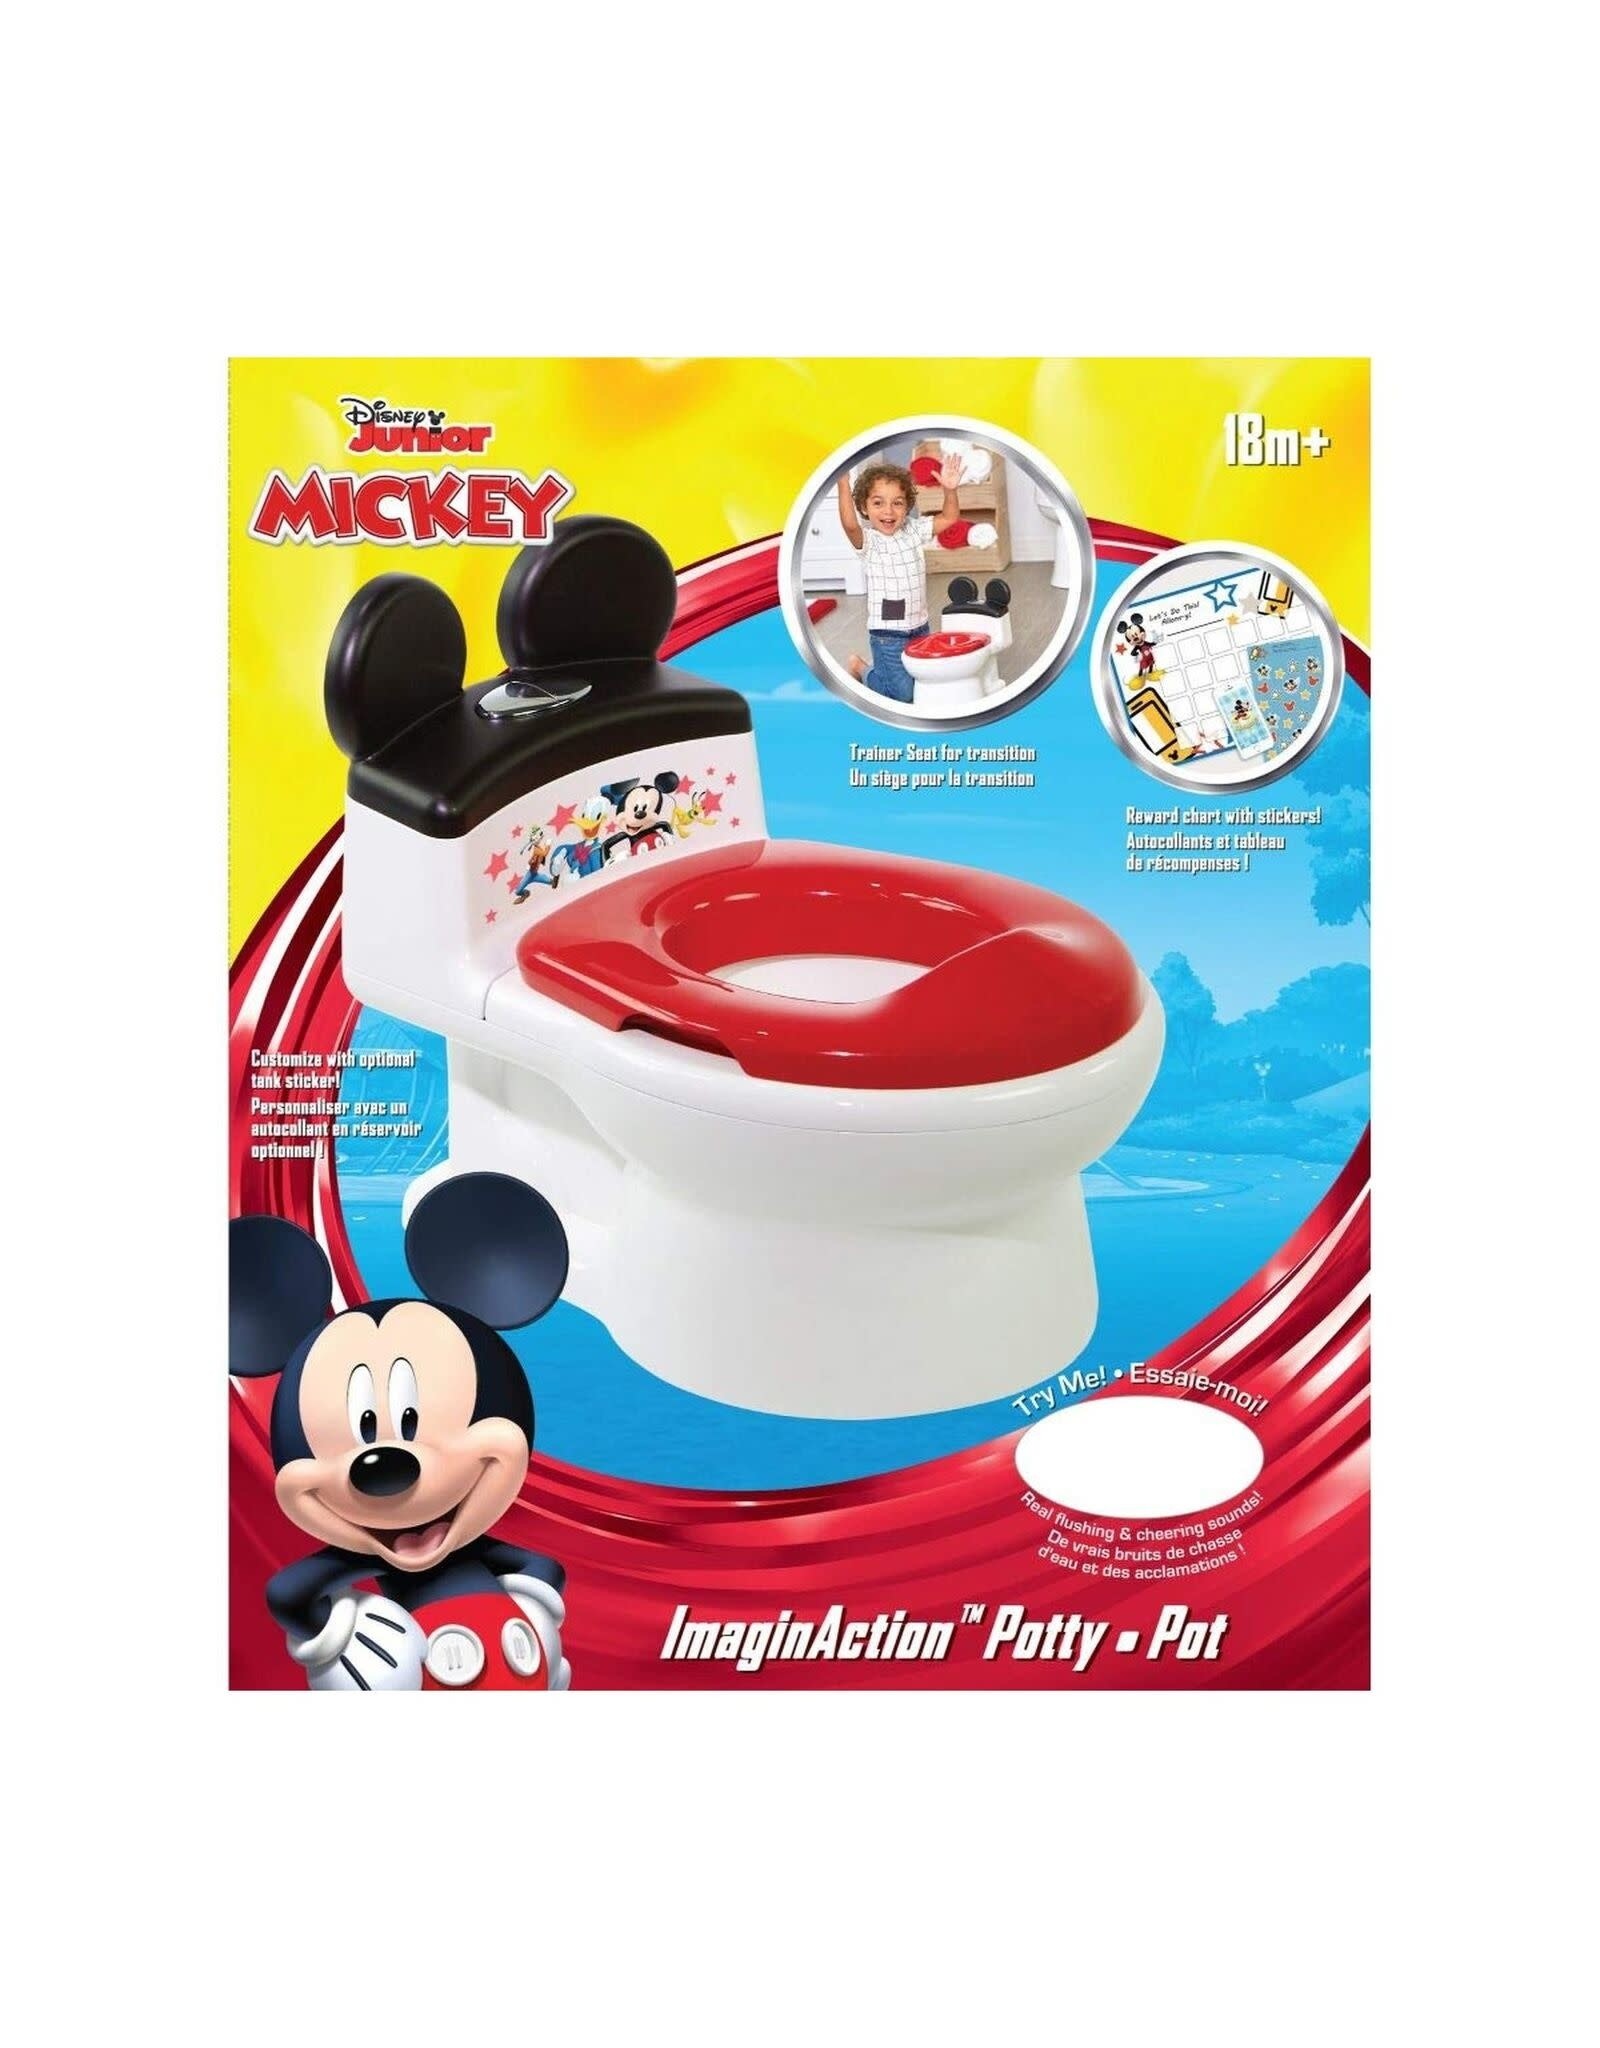 Mickey Potty and Trainer Seat